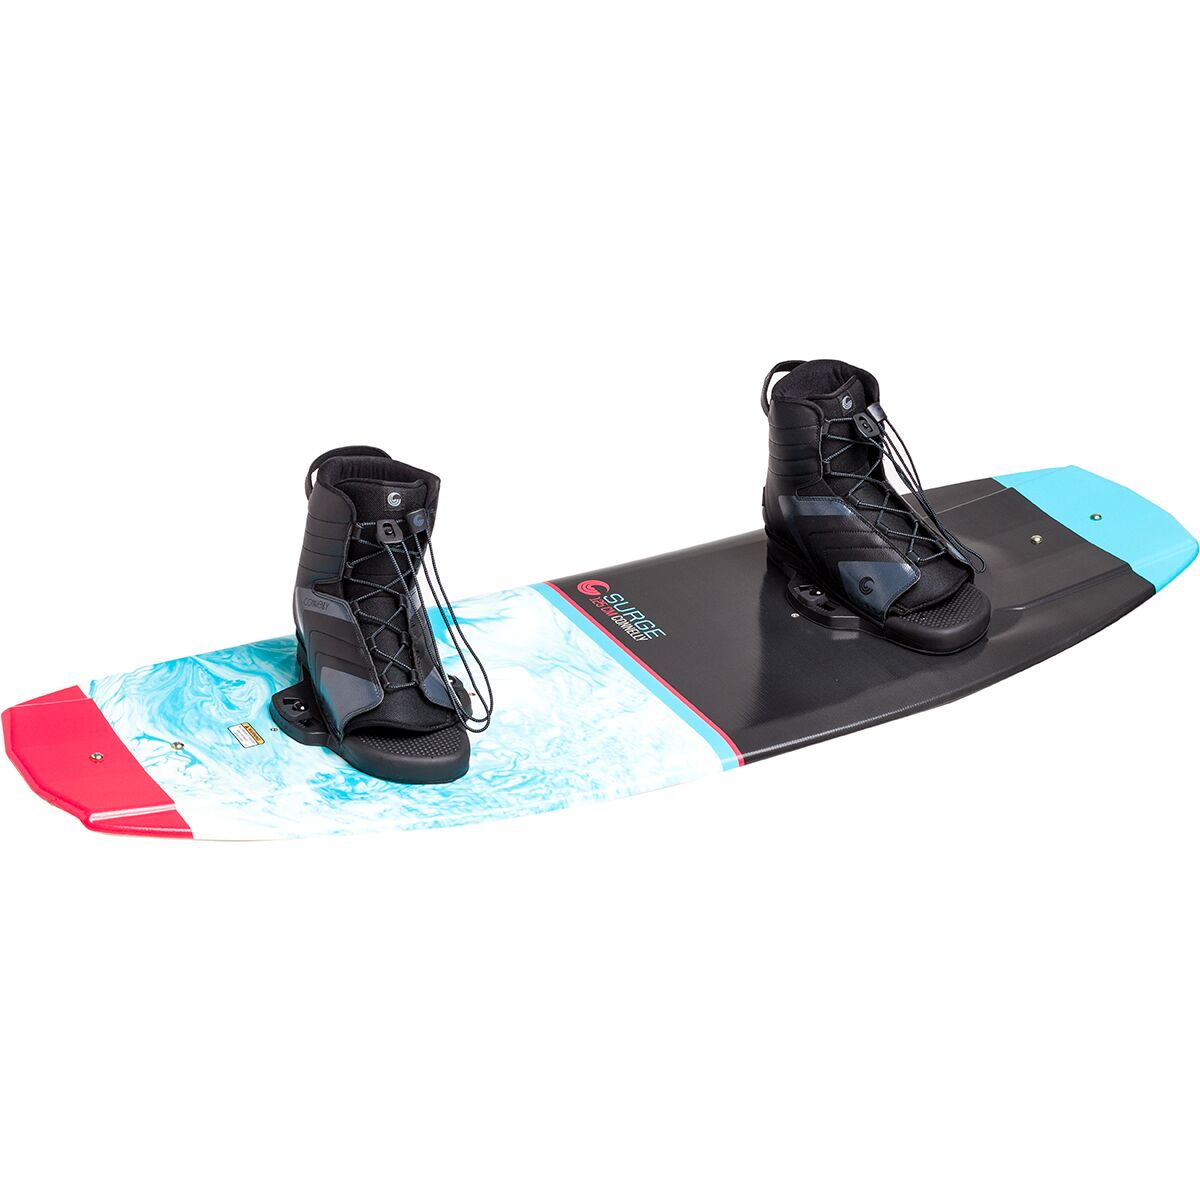 Connelly Skis Surge Wakeboard + Optima Binding